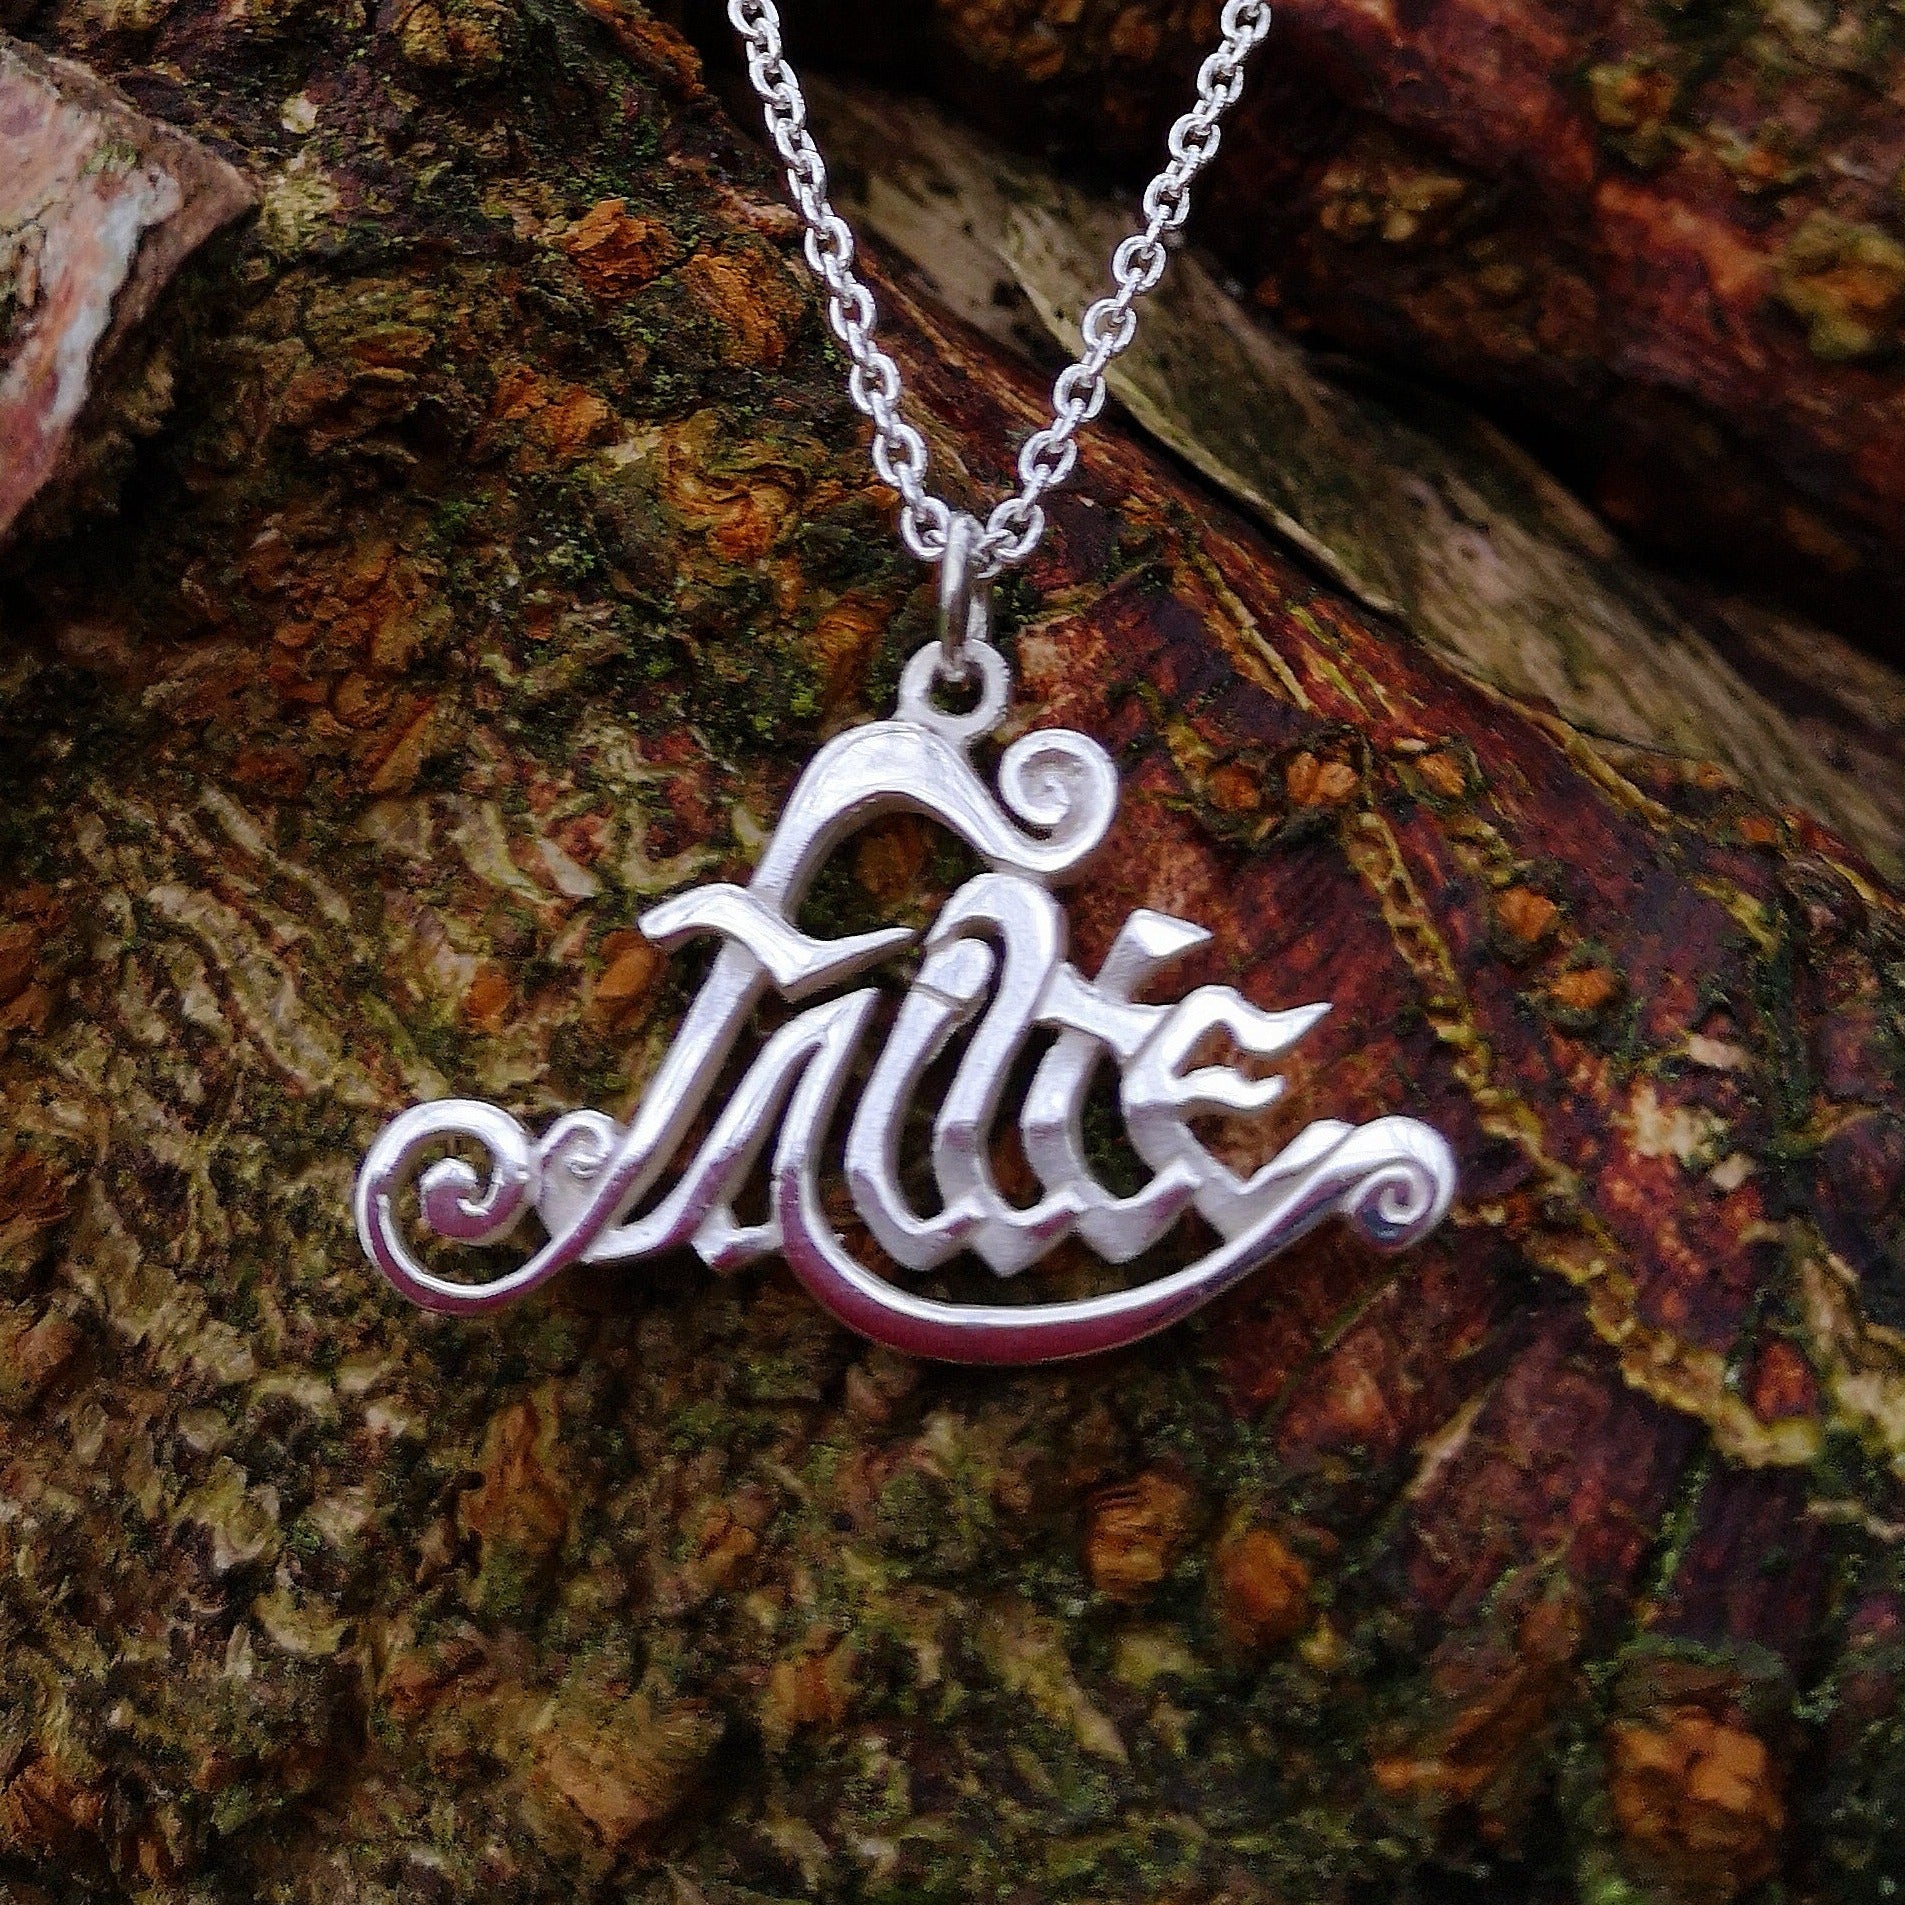 The sterling silver Fáilte Pendant hand made by Irish Jewellery Designer Elena Brennan. This Gaelic welcome pendant is hanging from a tree